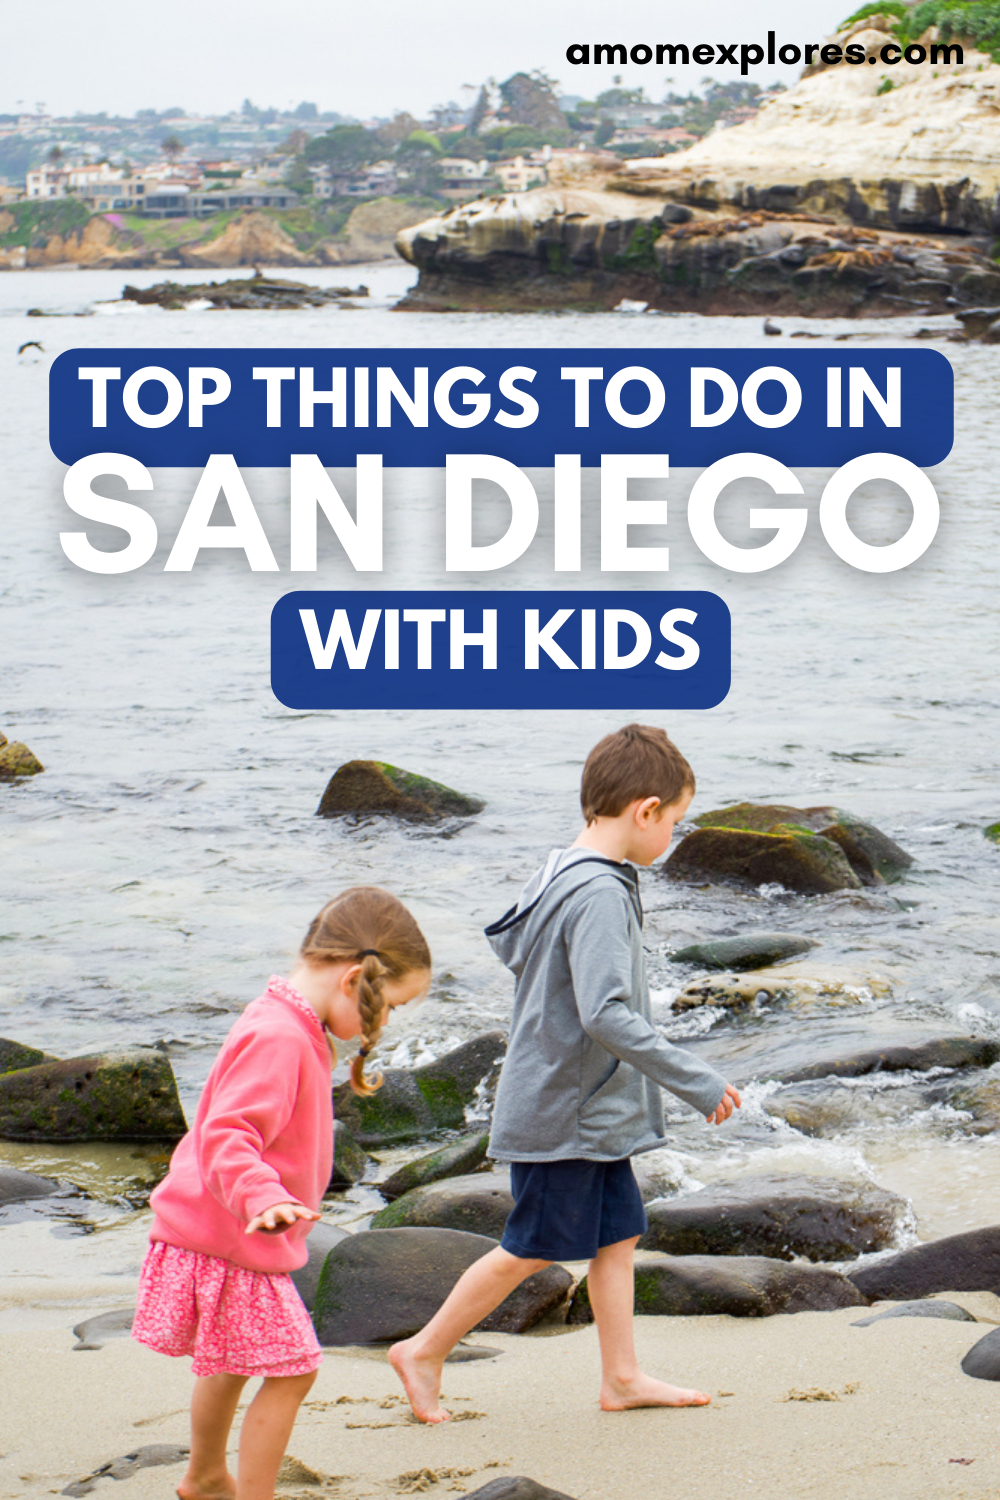 TOP THINGS TO DO IN SAN DIEGO WITH KIDS.png